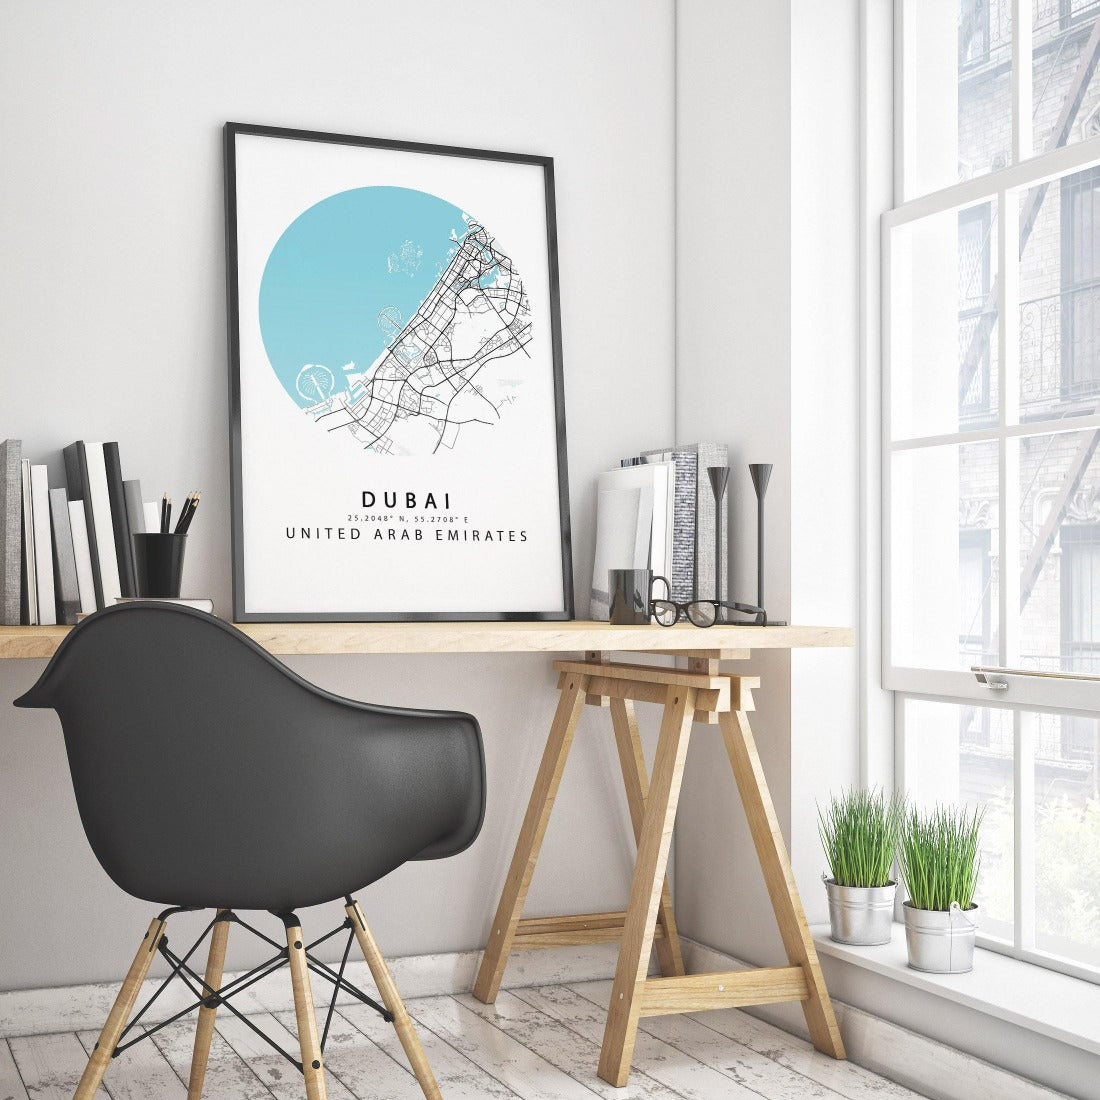 Discover the hidden Gems of Dubai with this Street Map Print. This high-quality print provides intricate details of the city streets, making it easy to find your way around. With its sleek and modern design, this print makes a great addition to any home or office. Plus, it makes a great gift for anyone who loves to explore new cities.